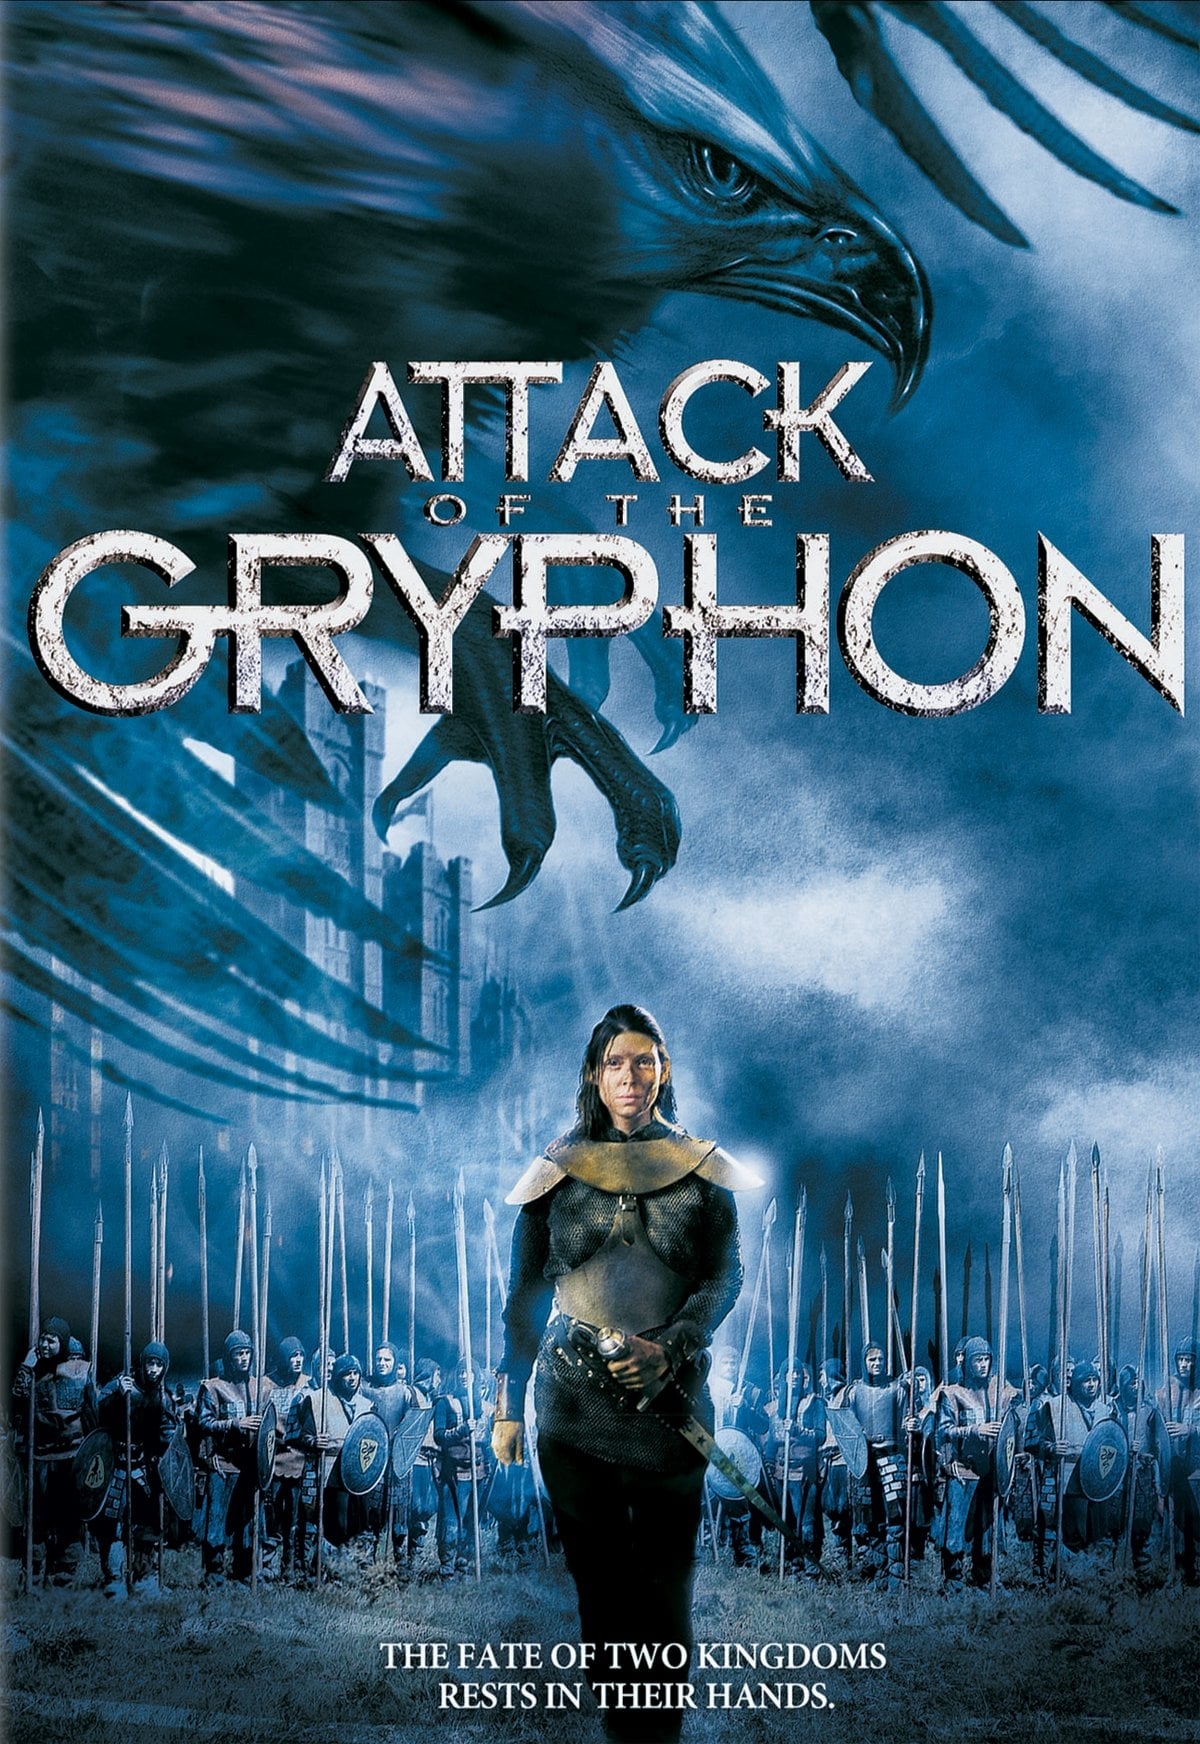 Attack of the Gryphon (2007)